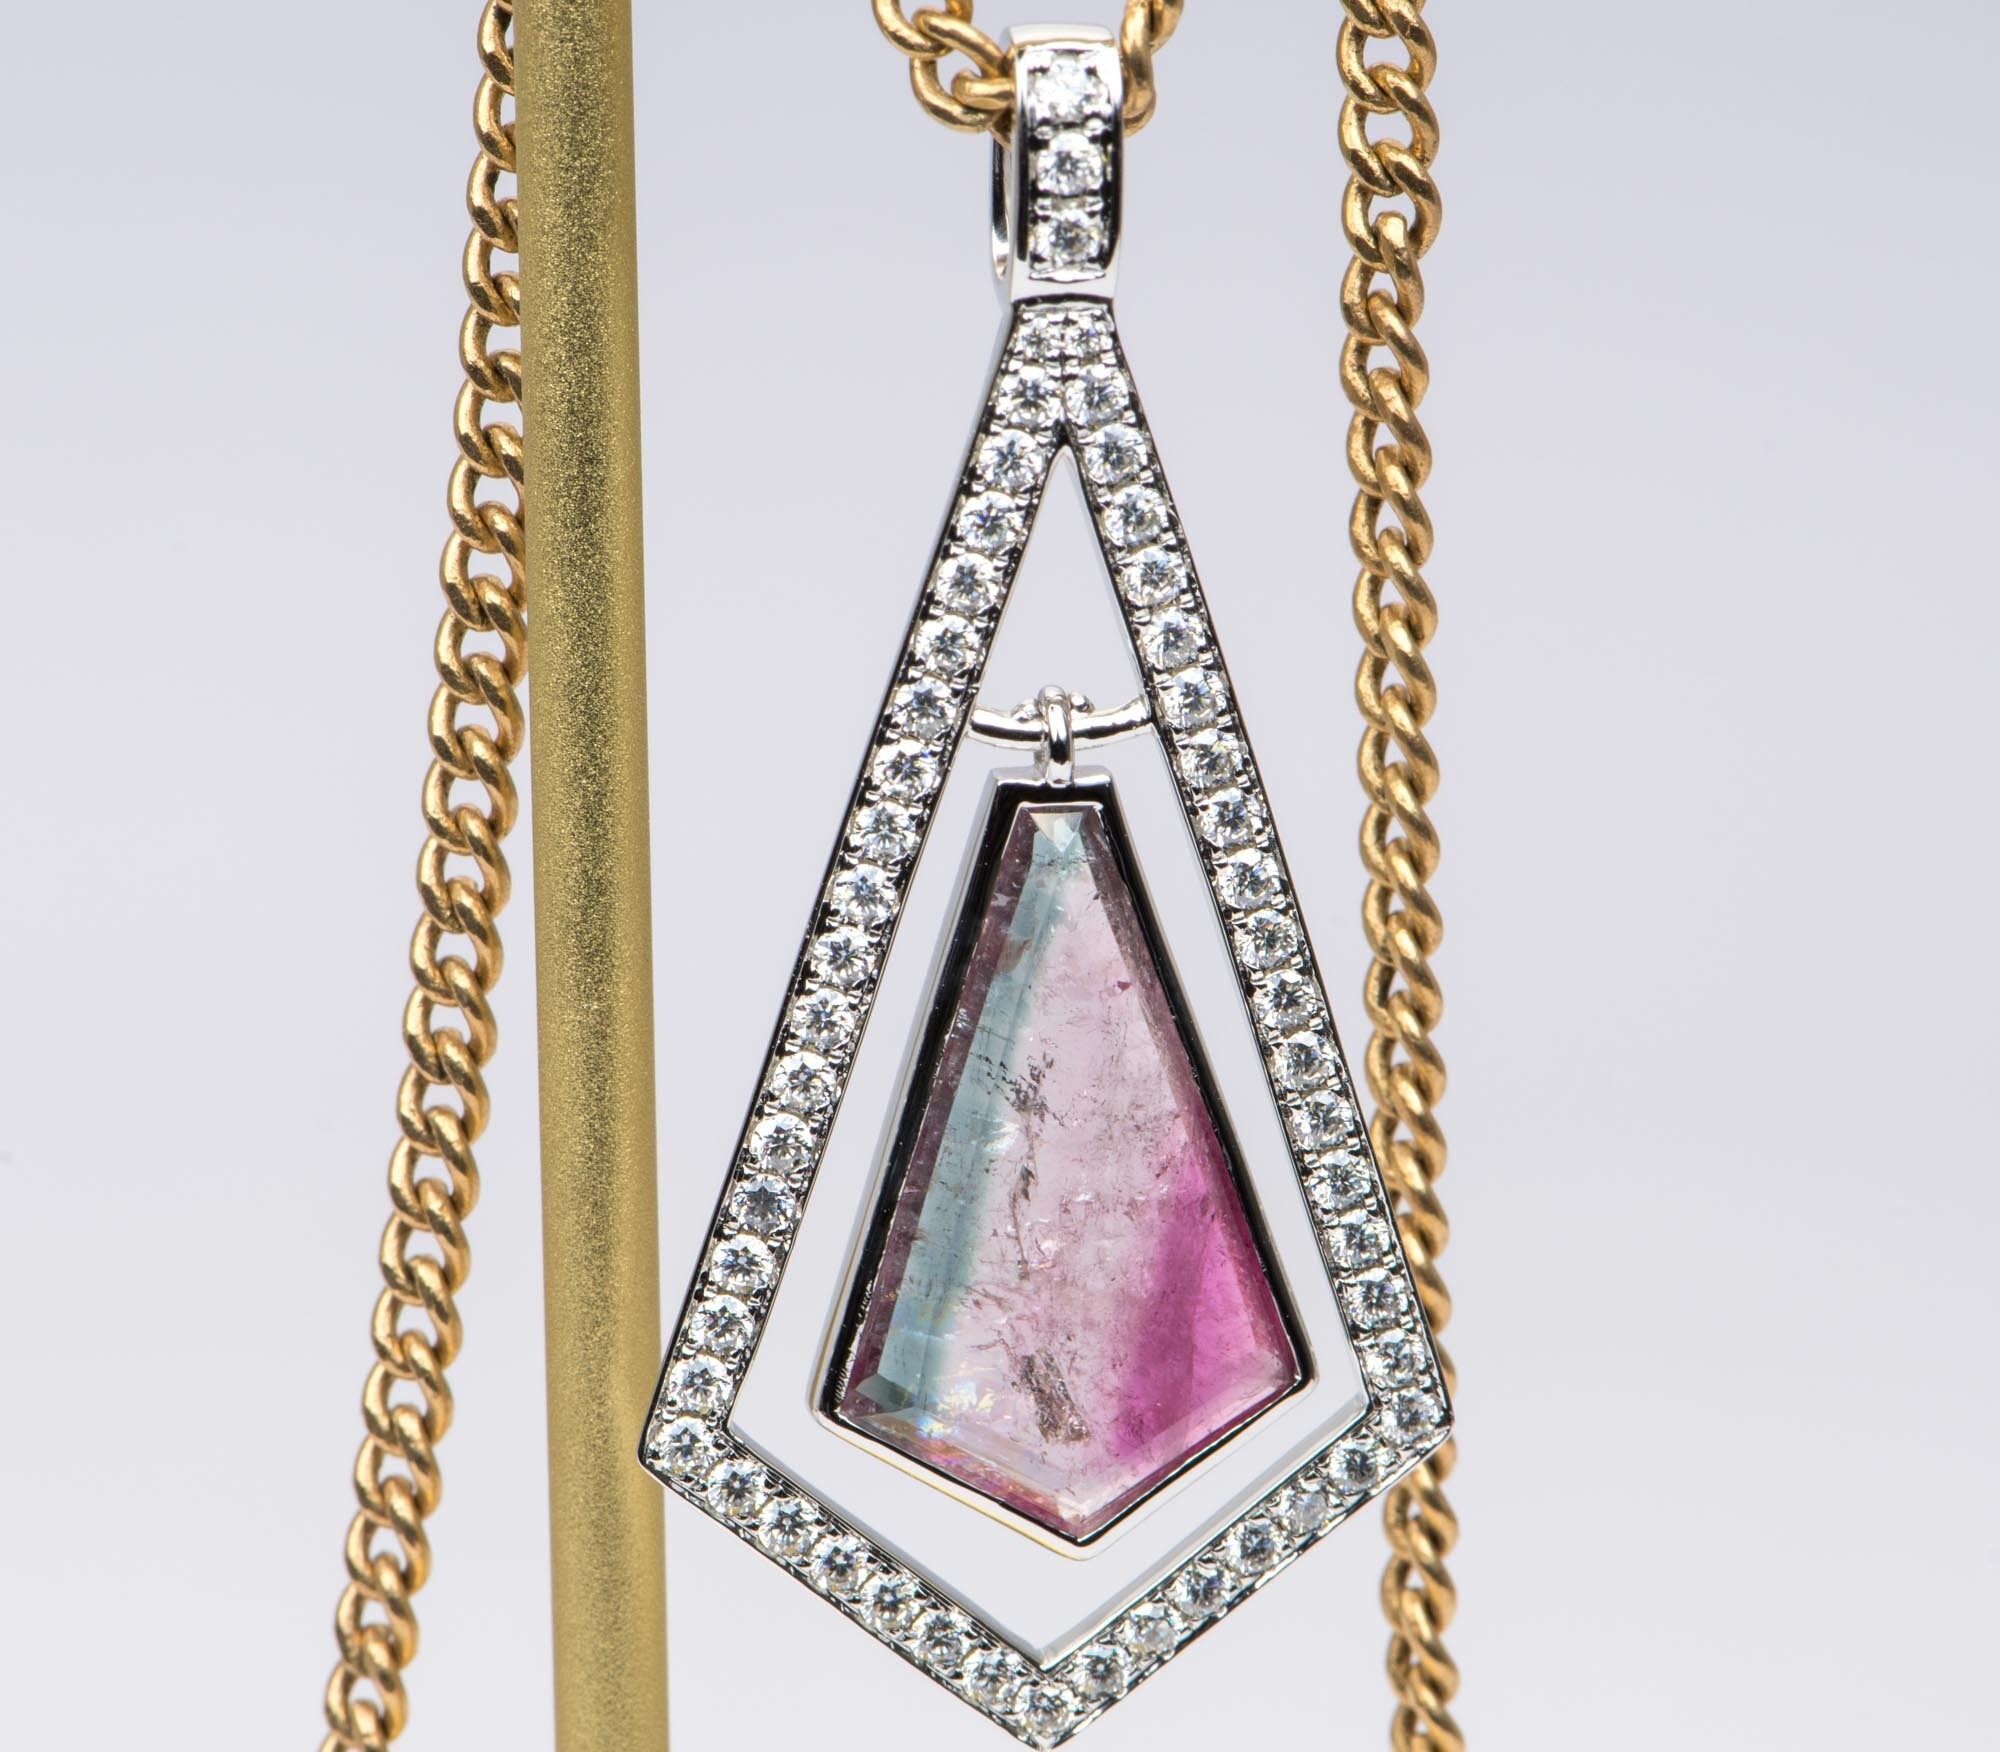 â™¥  This pendant has a stunning shield shape bi-color tourmaline pendant, a beautiful moissanite halo frames the center stone and highlights it's uniqueness
â™¥  The center Tourmaline is not fixed so it has movement
â™¥  This listing is for the